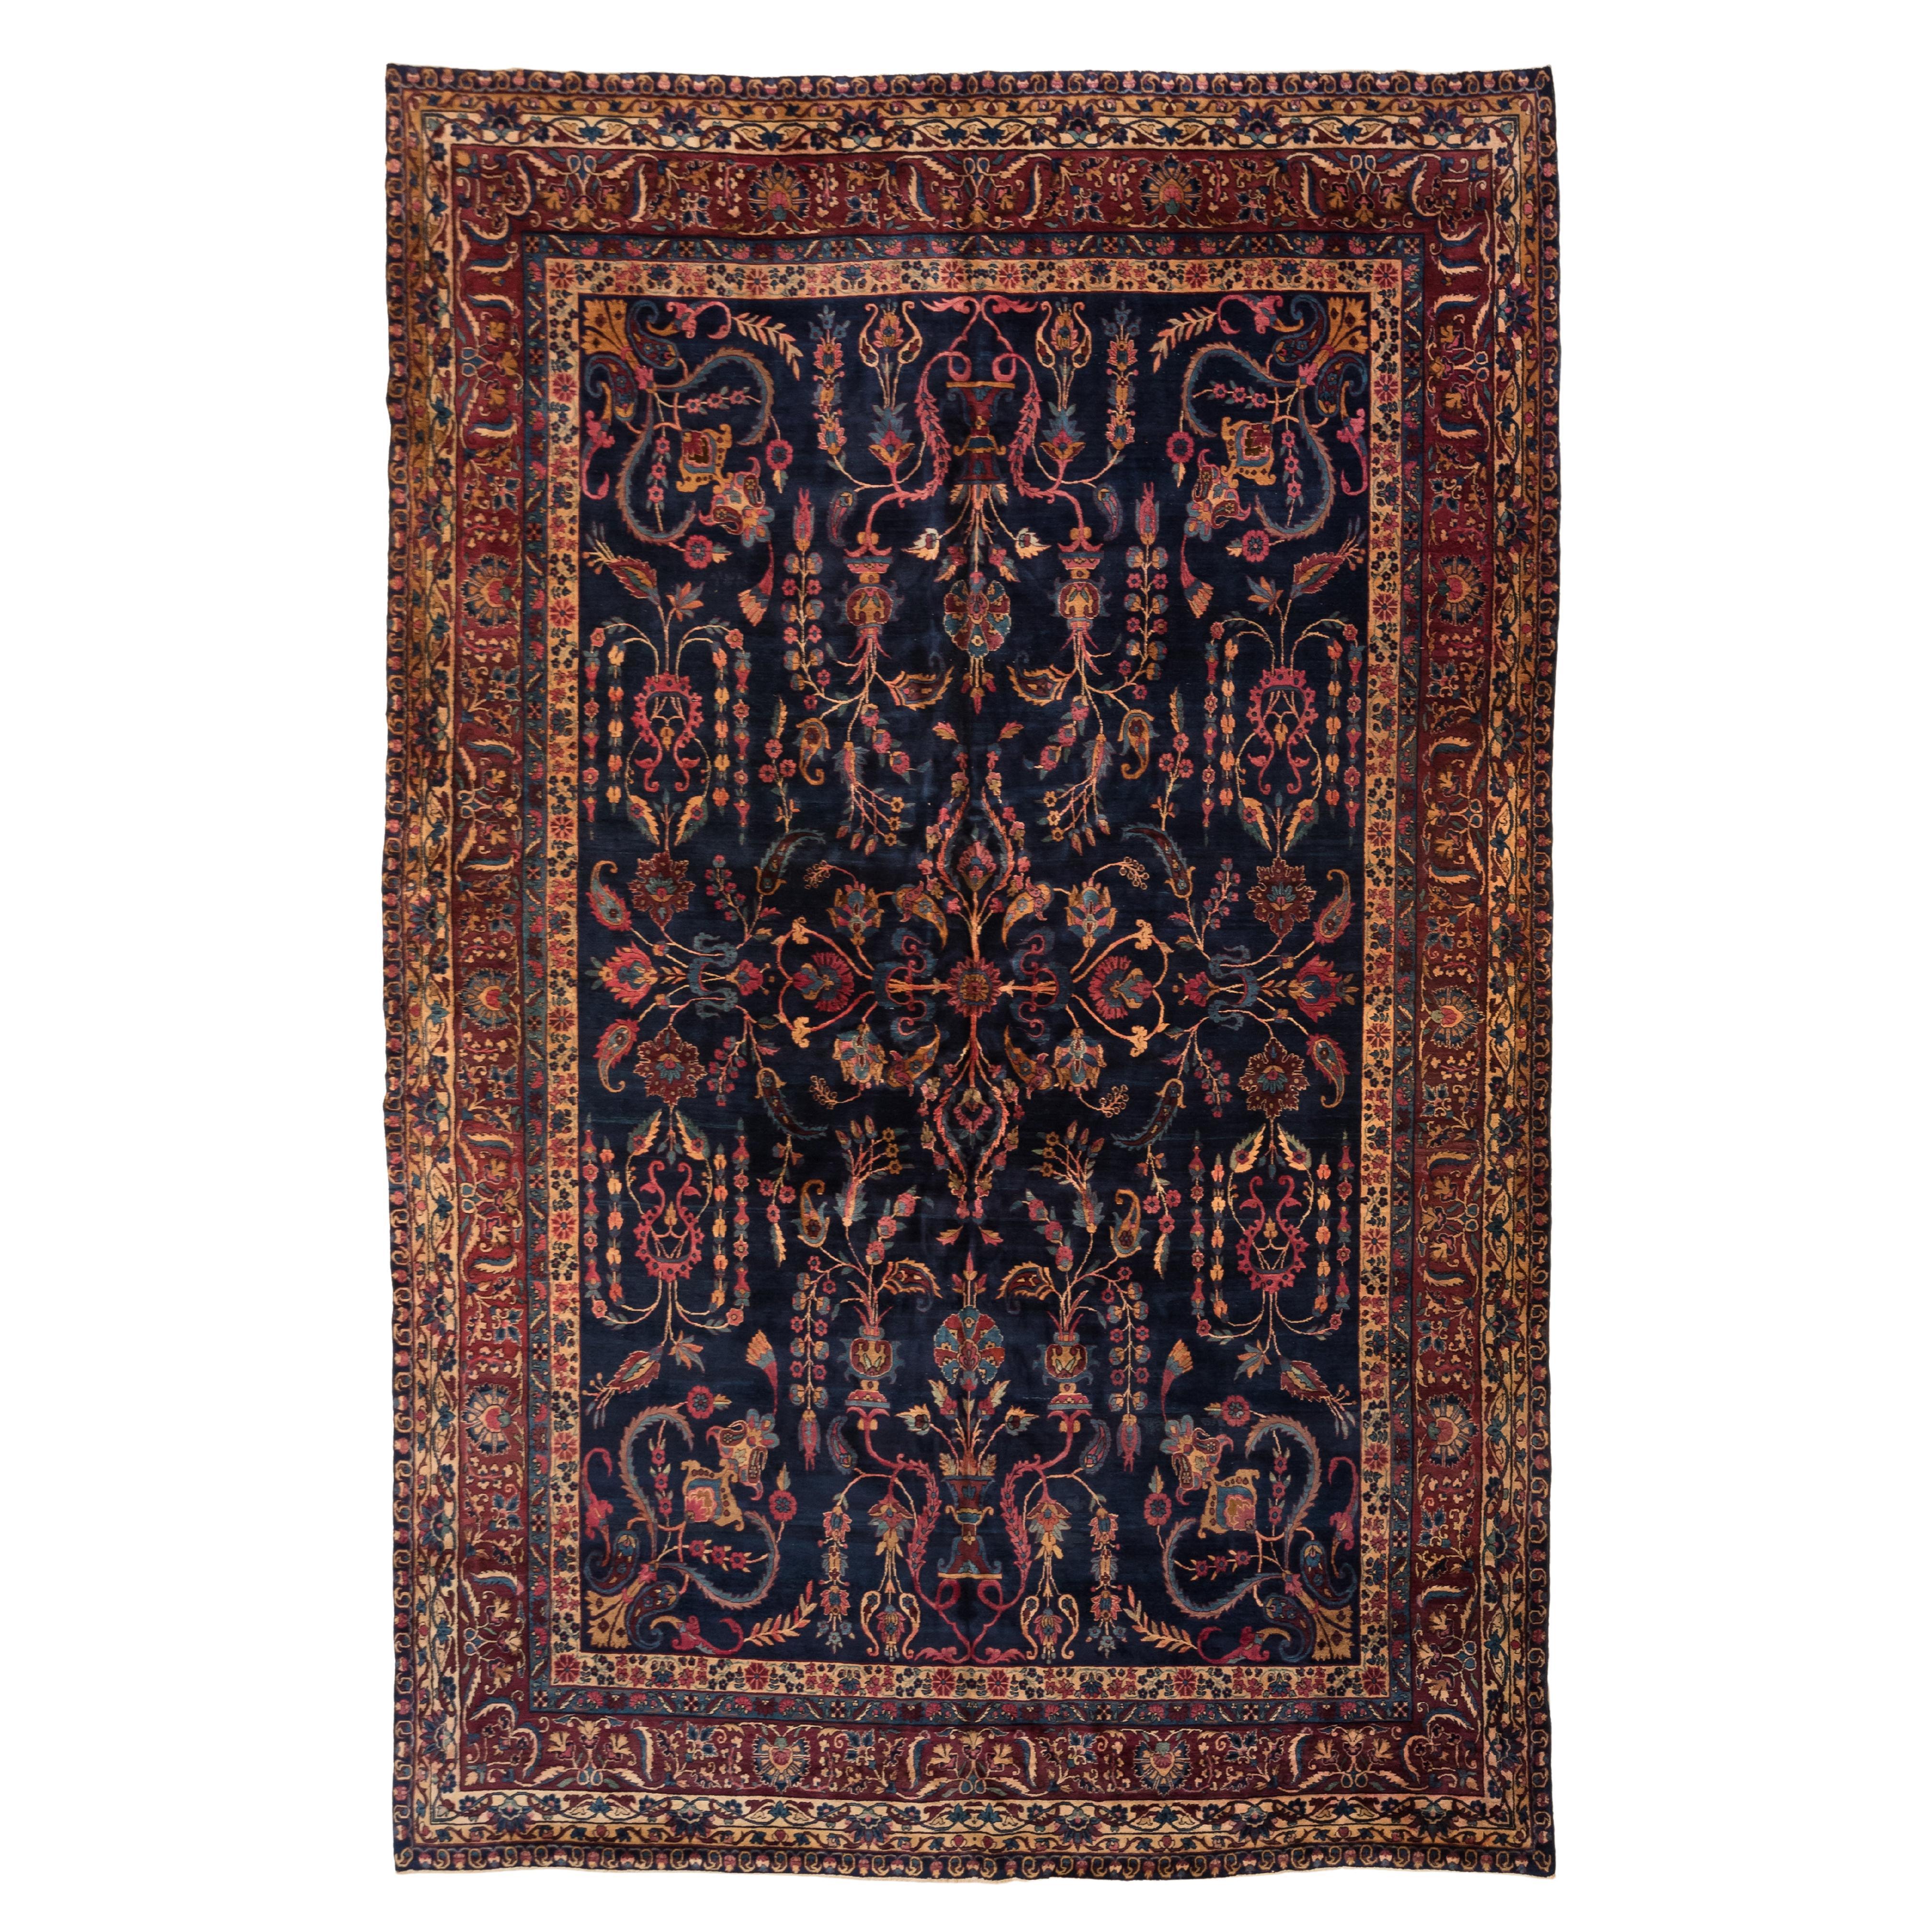 Antique Navy Blue and Gold Floral Persian Kirman Rug, circa 1920s-1930s For Sale